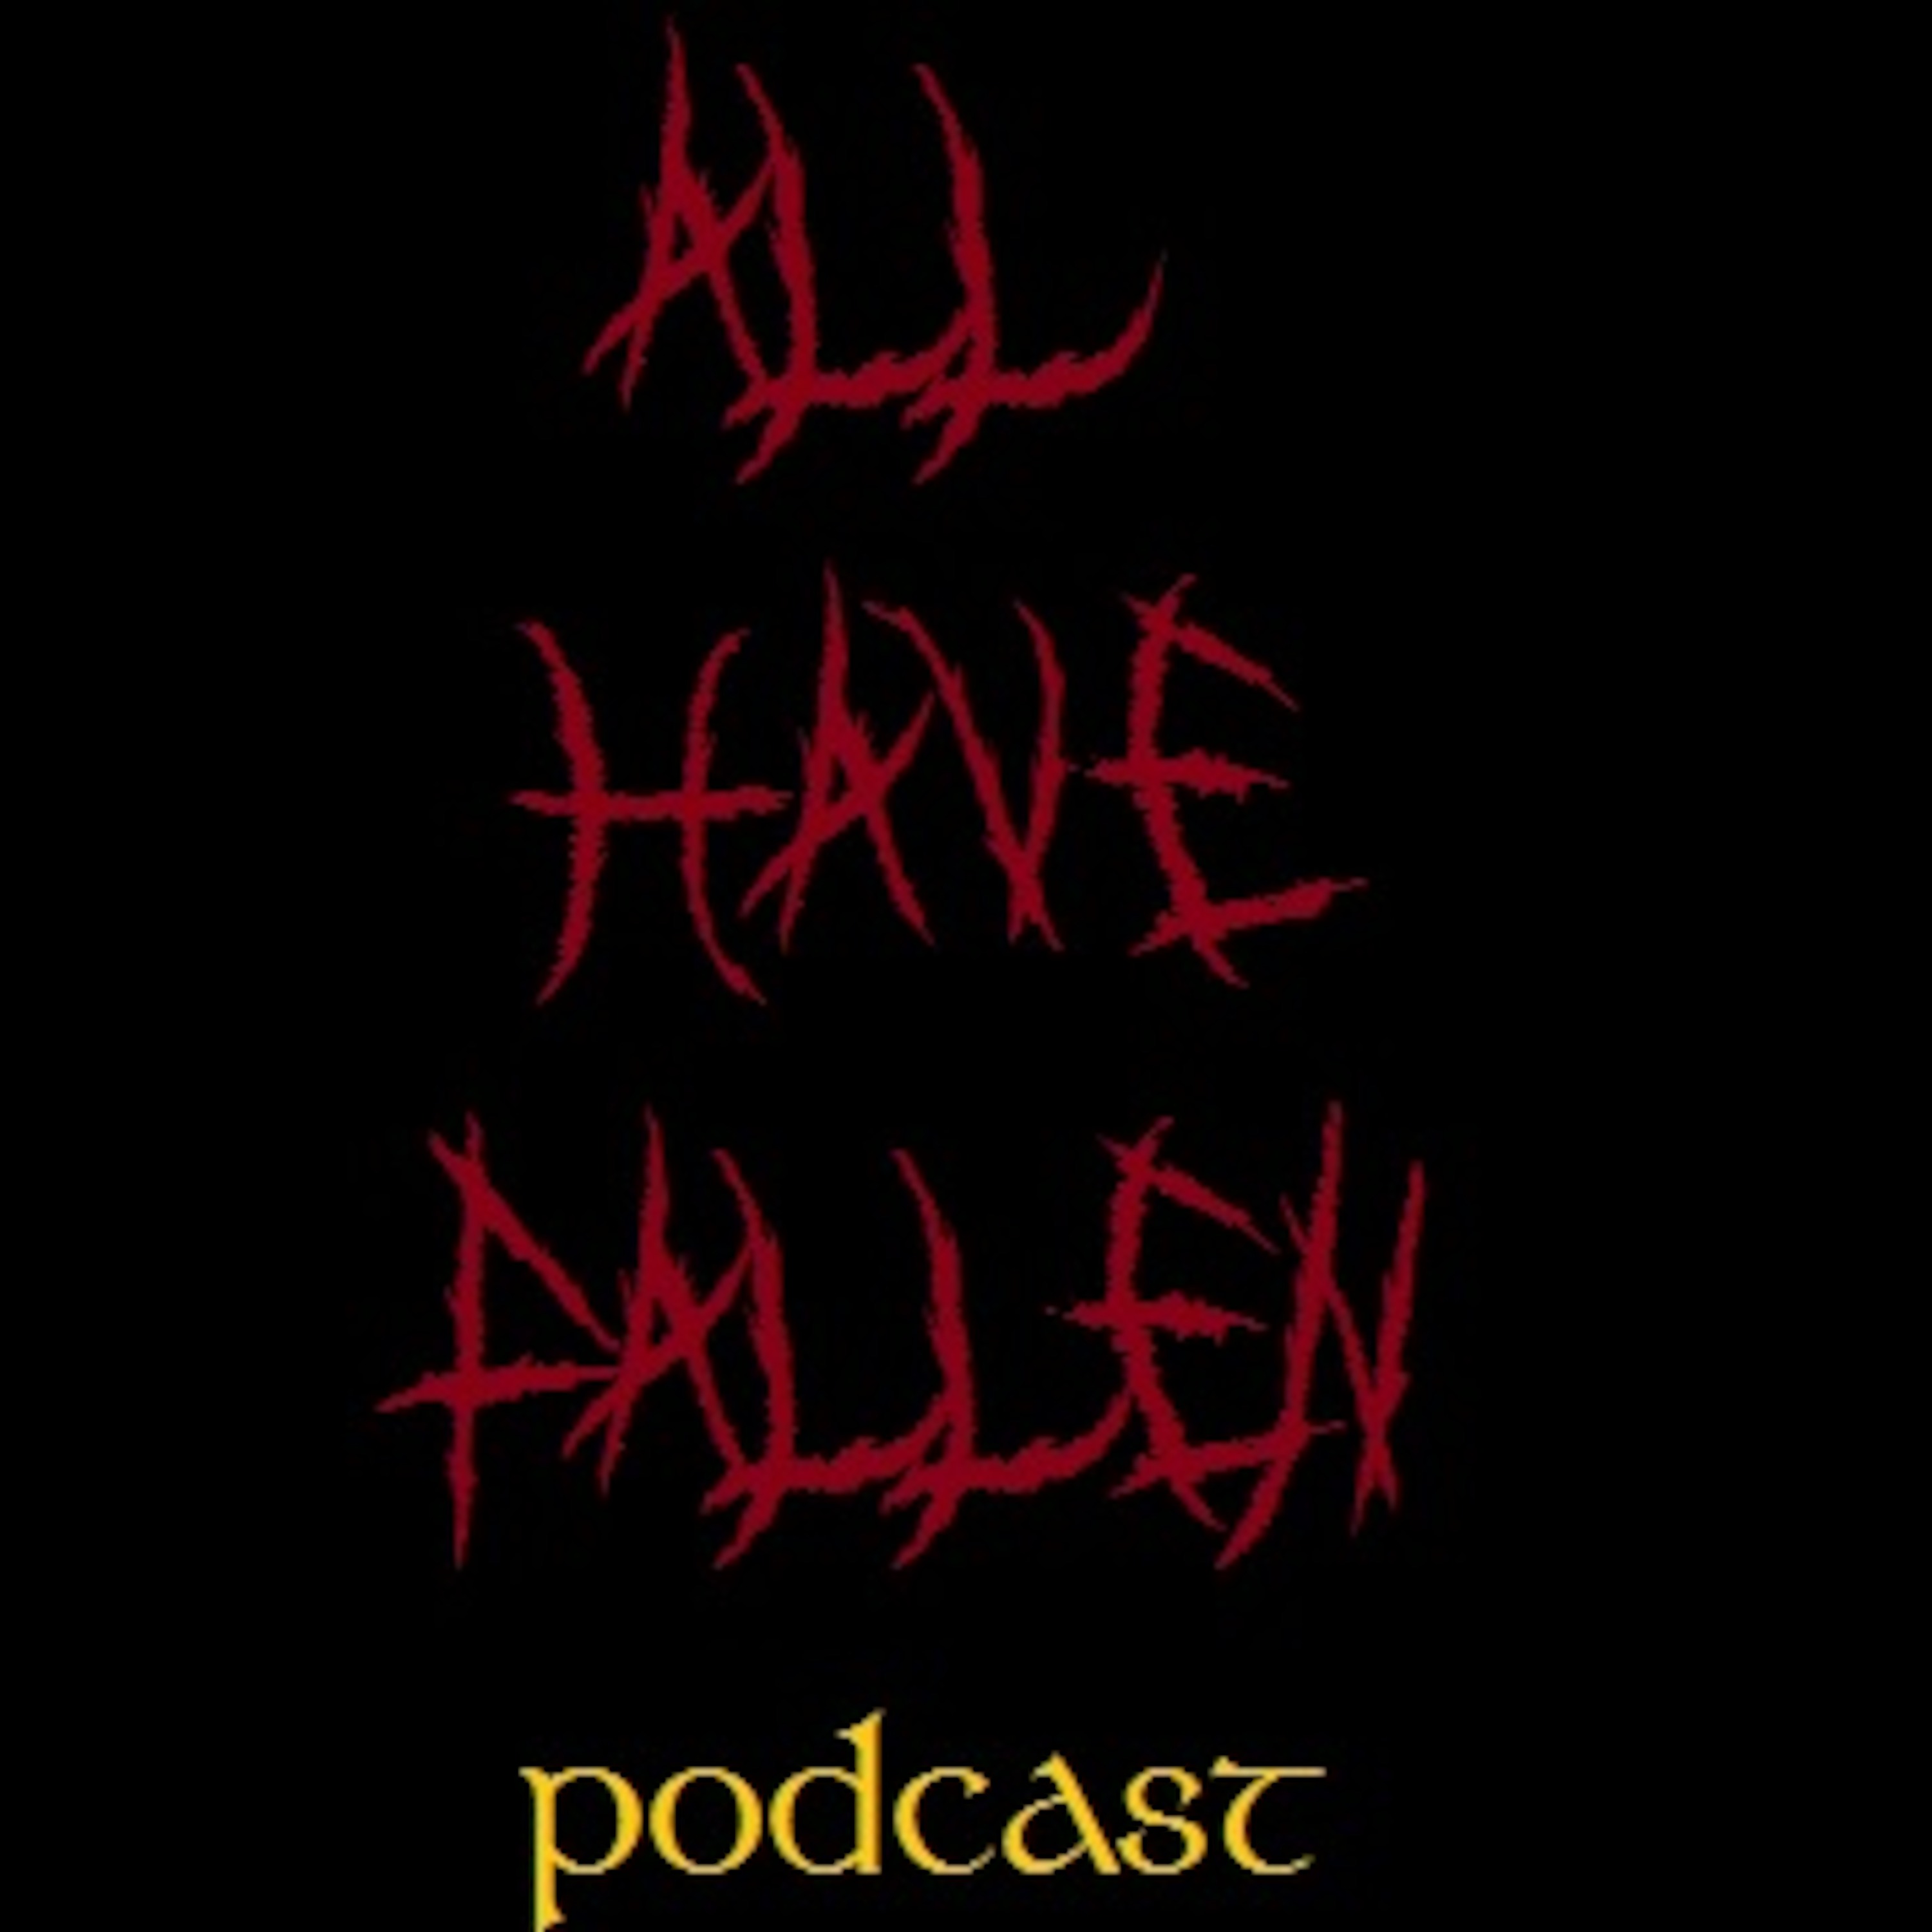 All Have Fallen Podcast